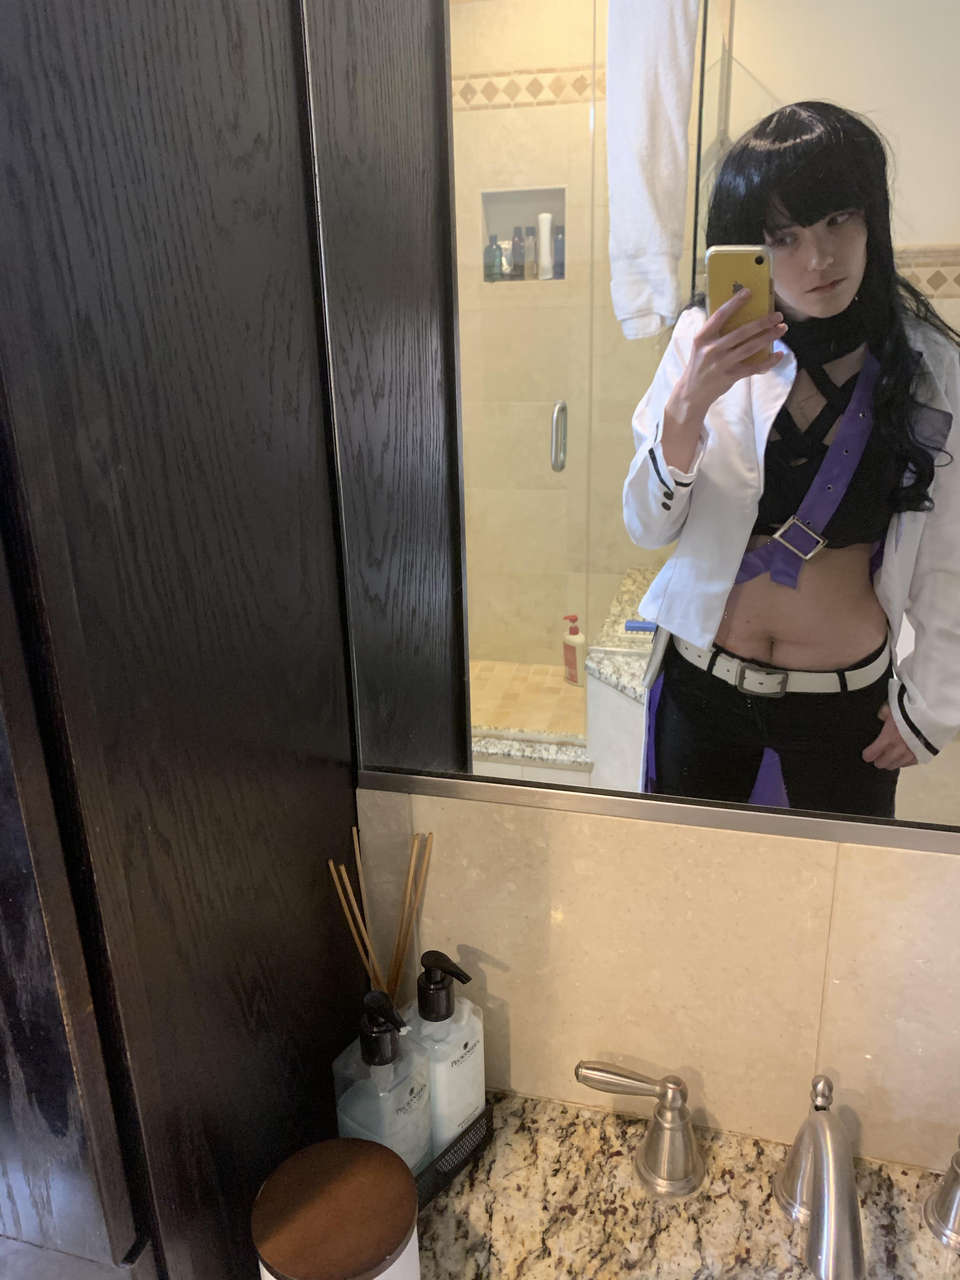 First Time Cosplaying Blake No Cat Ears Yet But I Hope Everything Else Does Her Justice